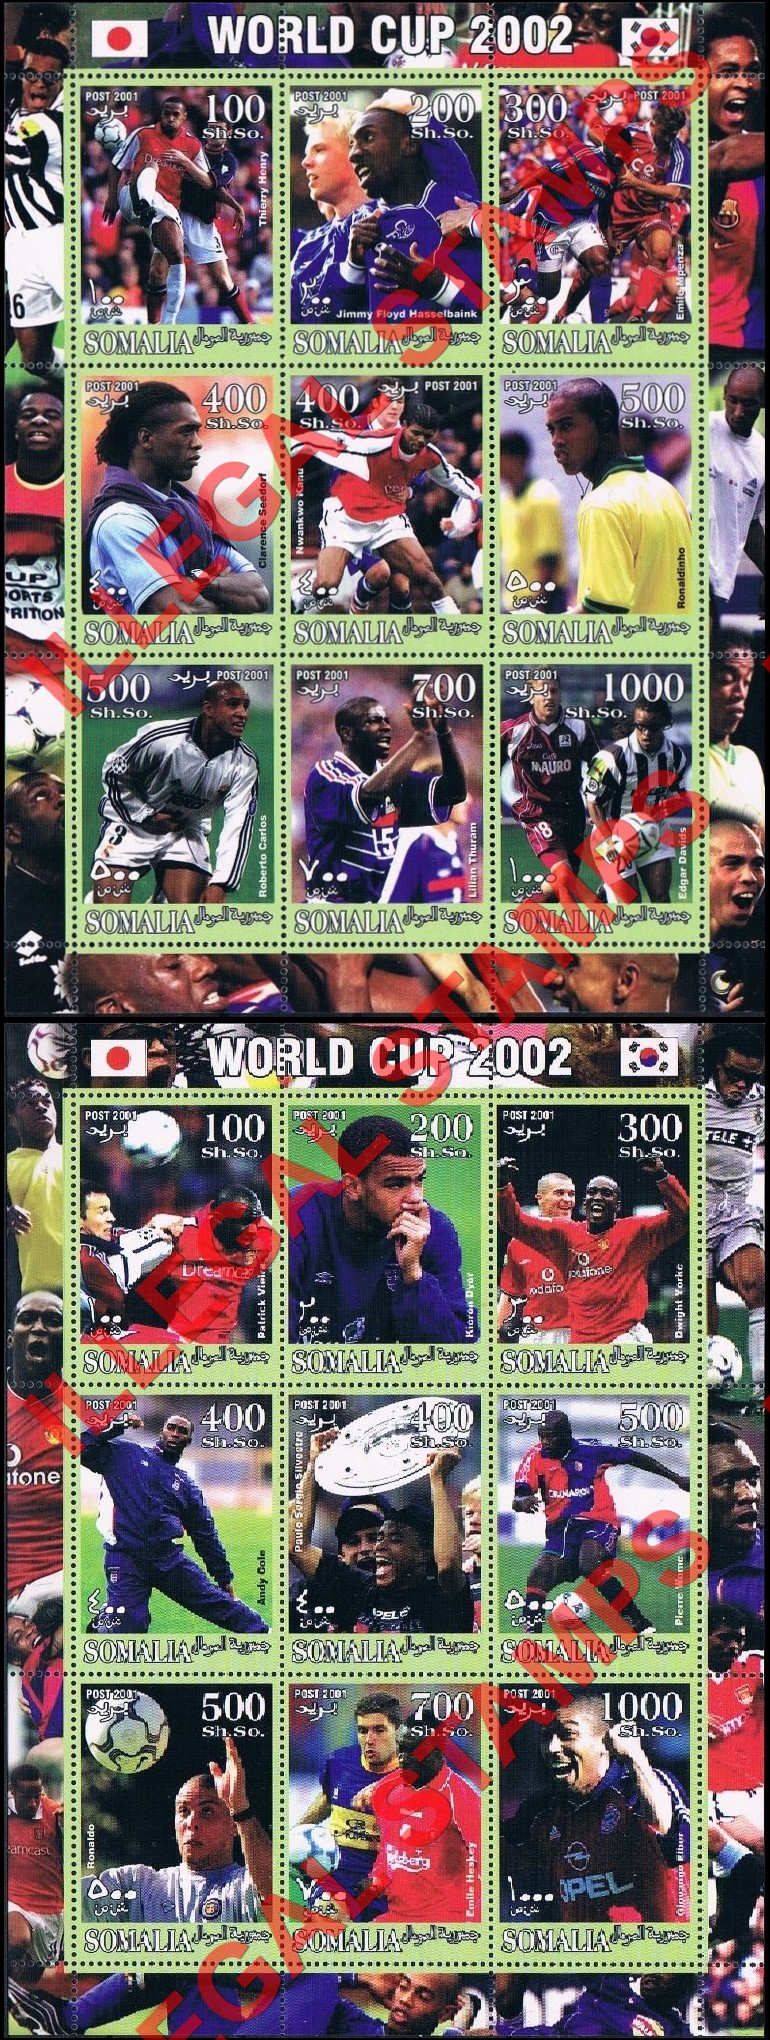 Somalia 2001 World Cup Soccer in 2002 Illegal Stamp Souvenir Sheets of 9